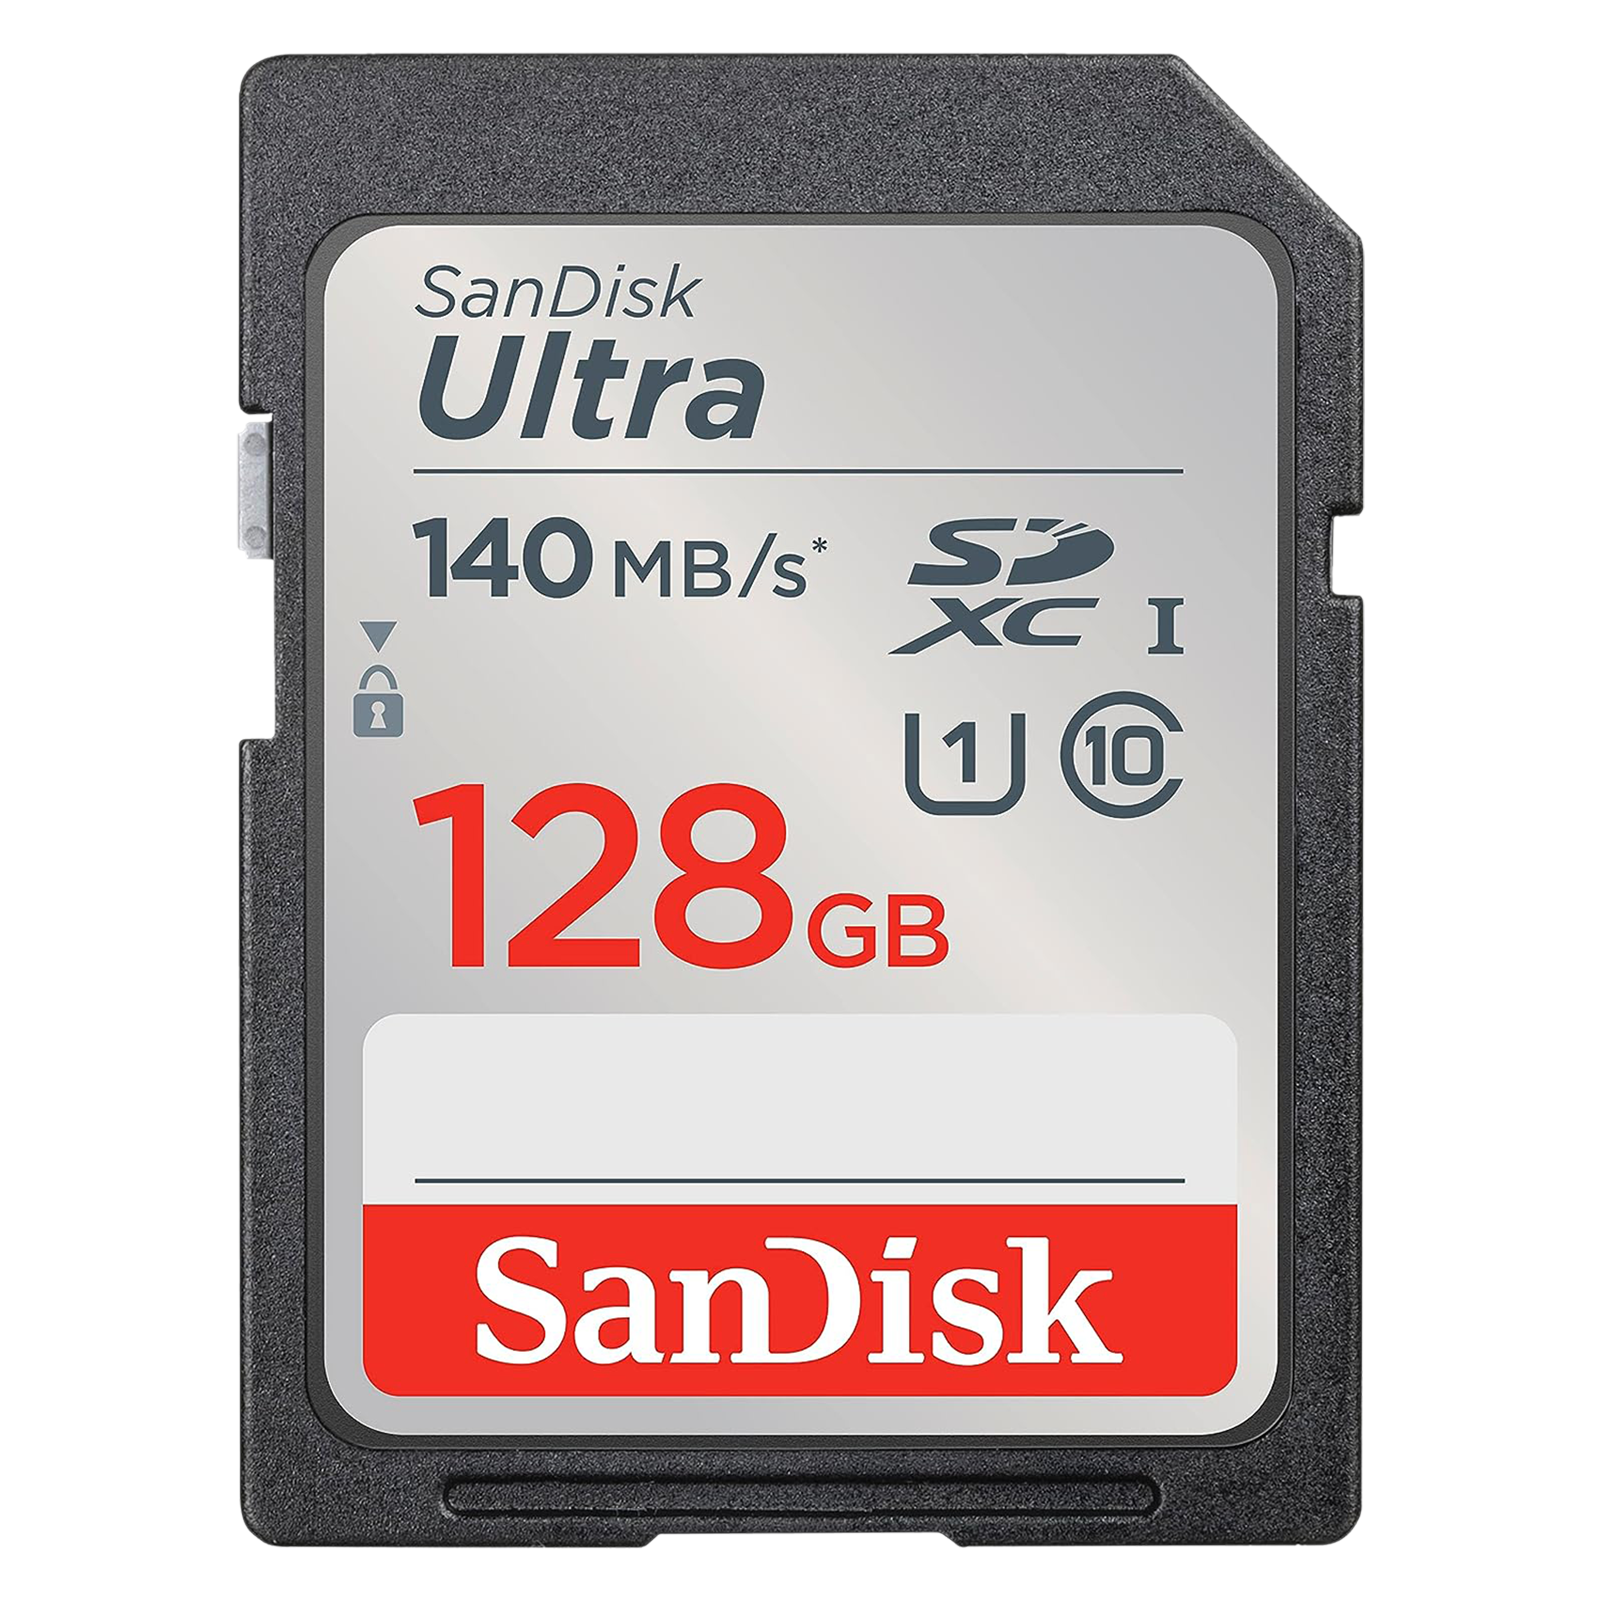 SanDisk Ultra 128GB microSDXC Memory Card UHS-I Class 10 SDSQUNS-128G-GN6MN  Bundle with (1) Everything But Stromboli Multi-Slot Micro and SD Card